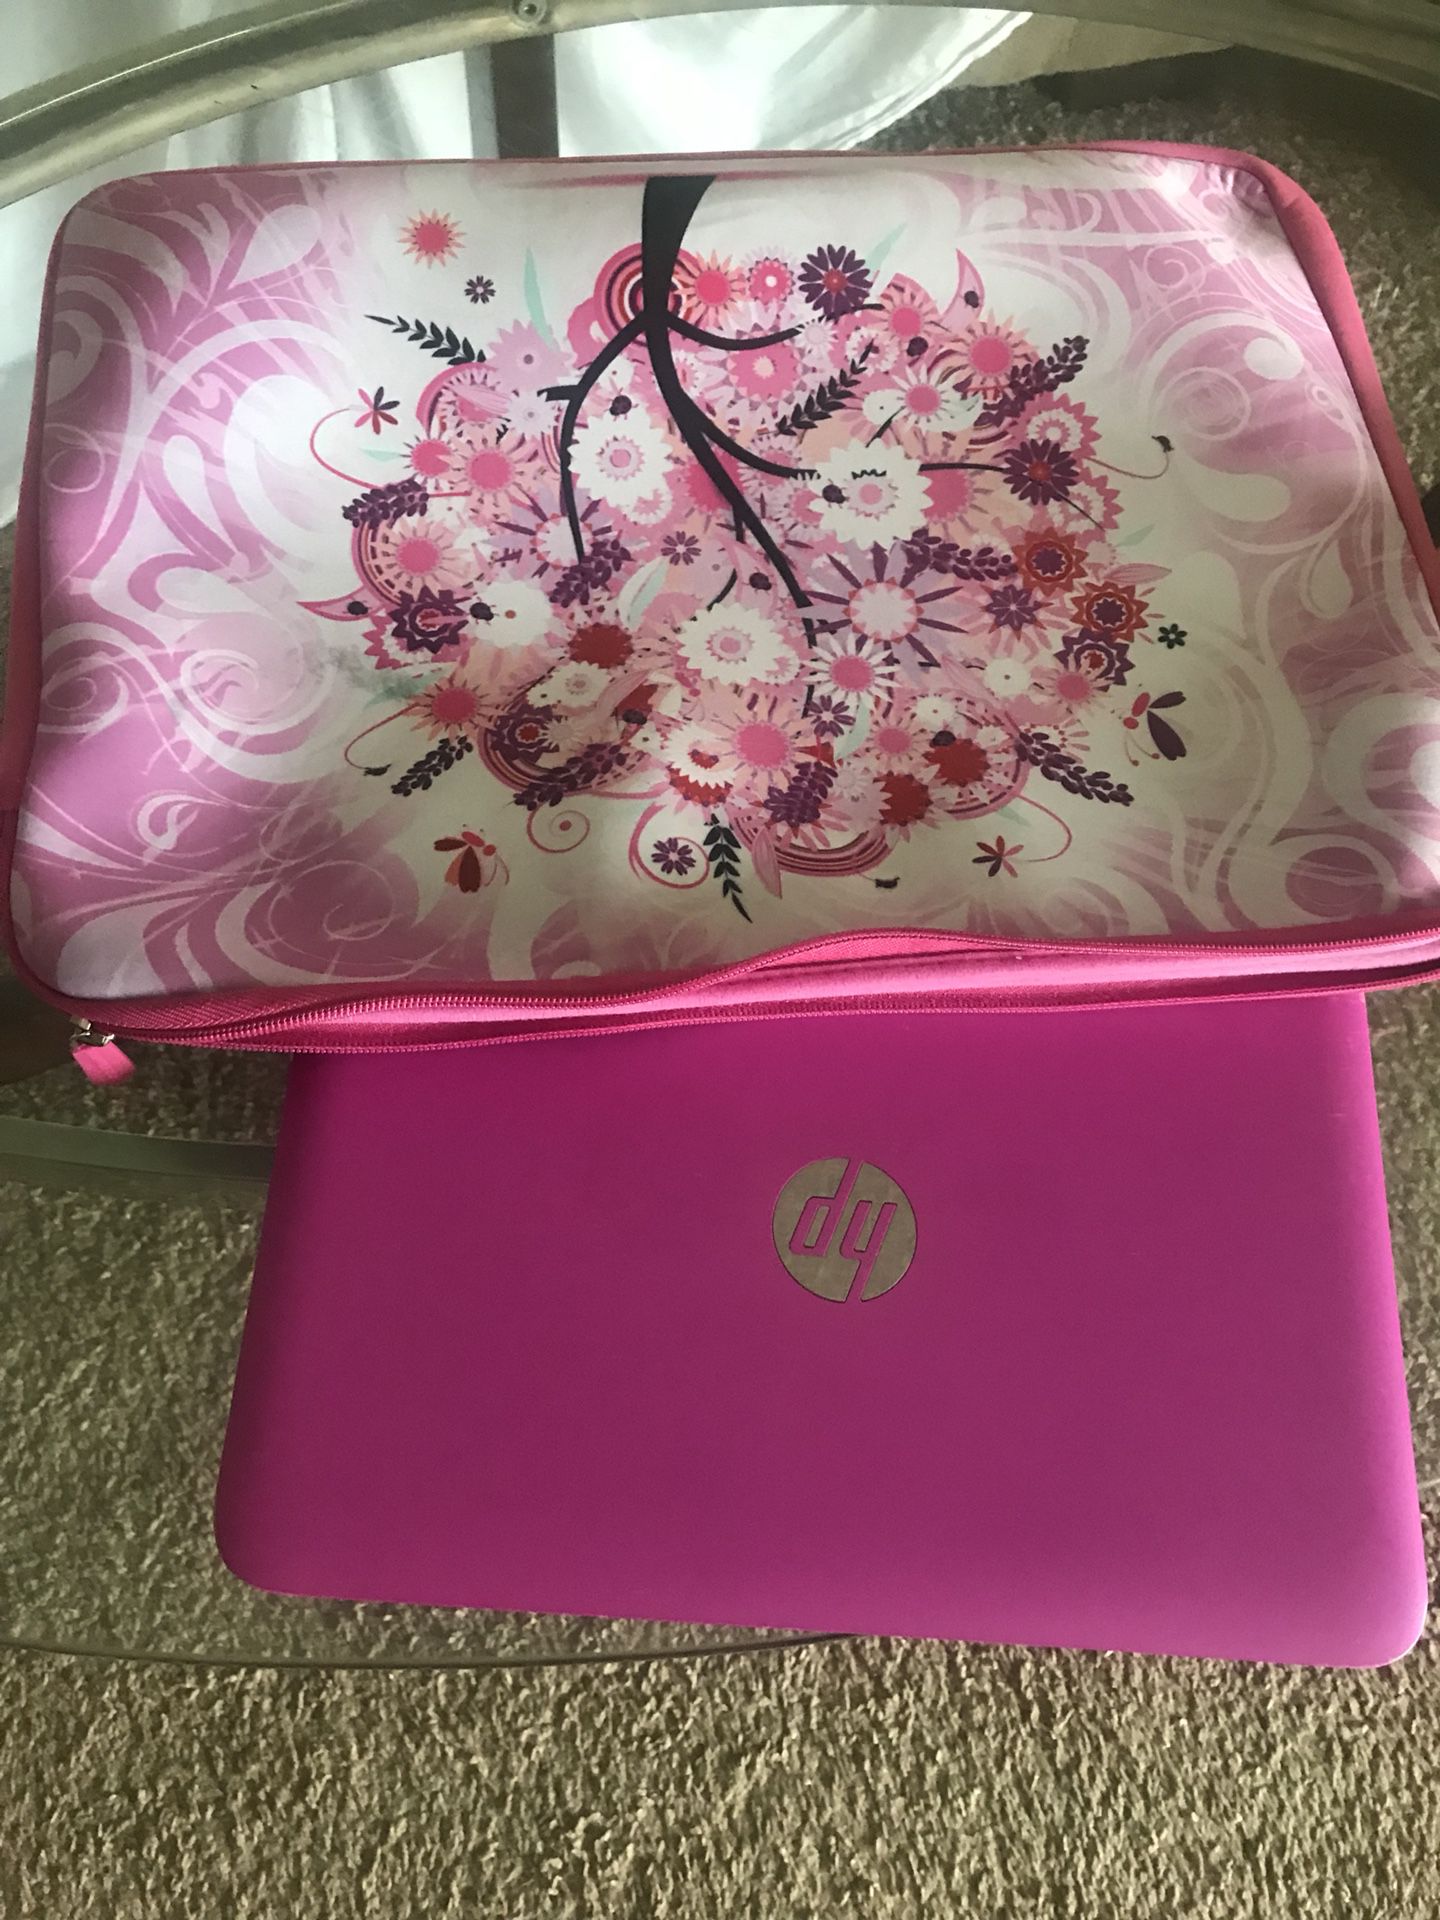 Hp laptop with bag